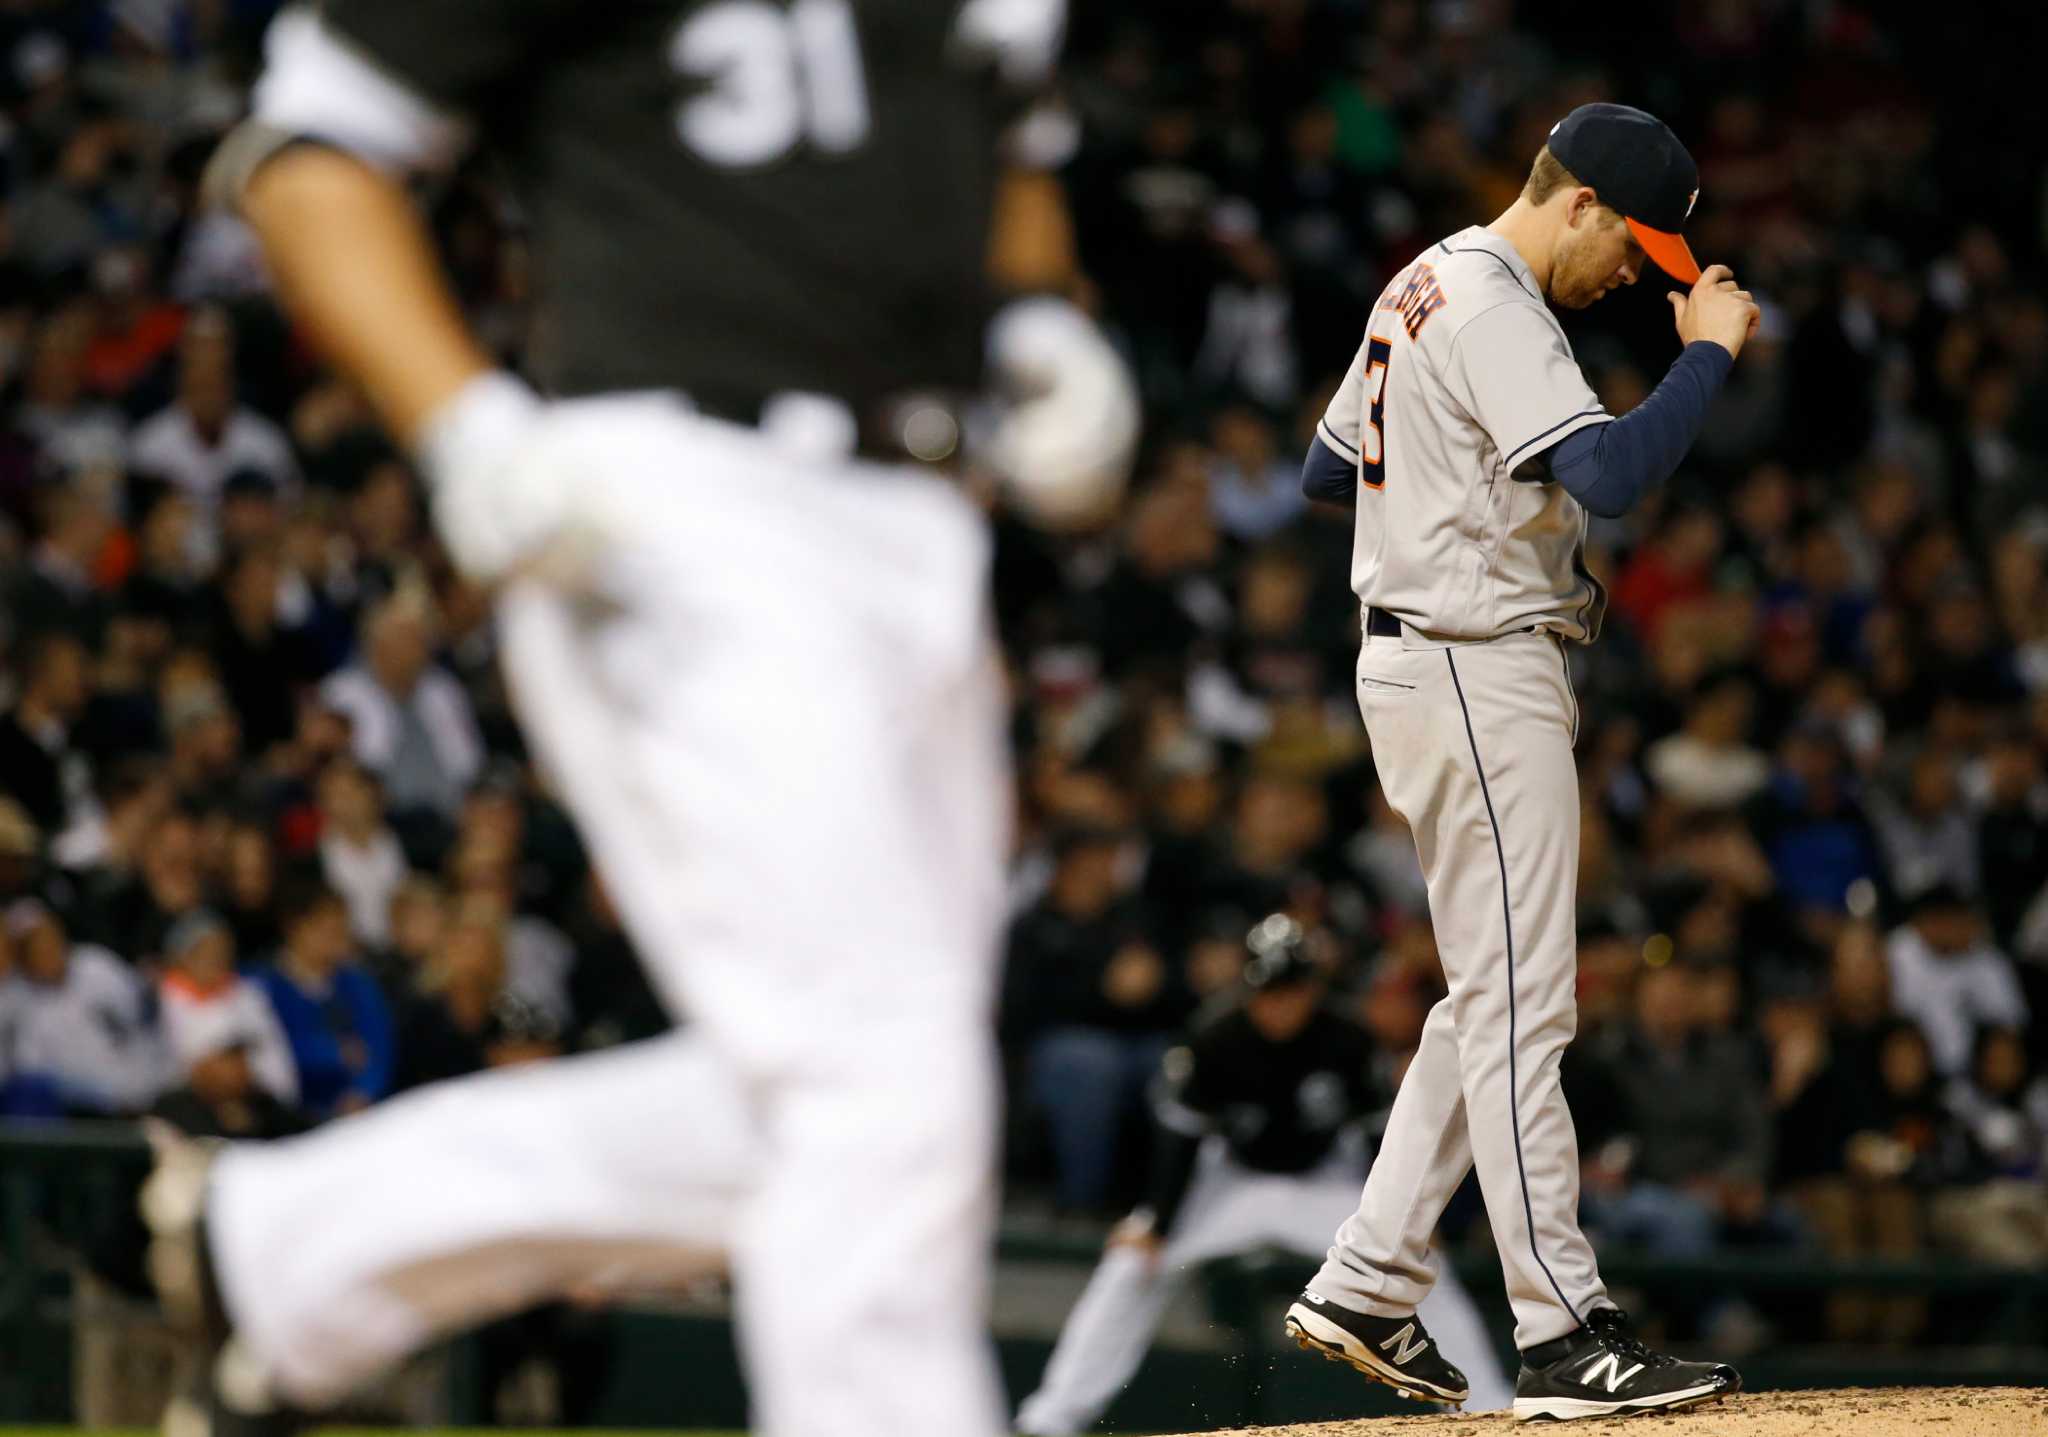 Evan Gattis helps Astros notch extra-innings win over White Sox